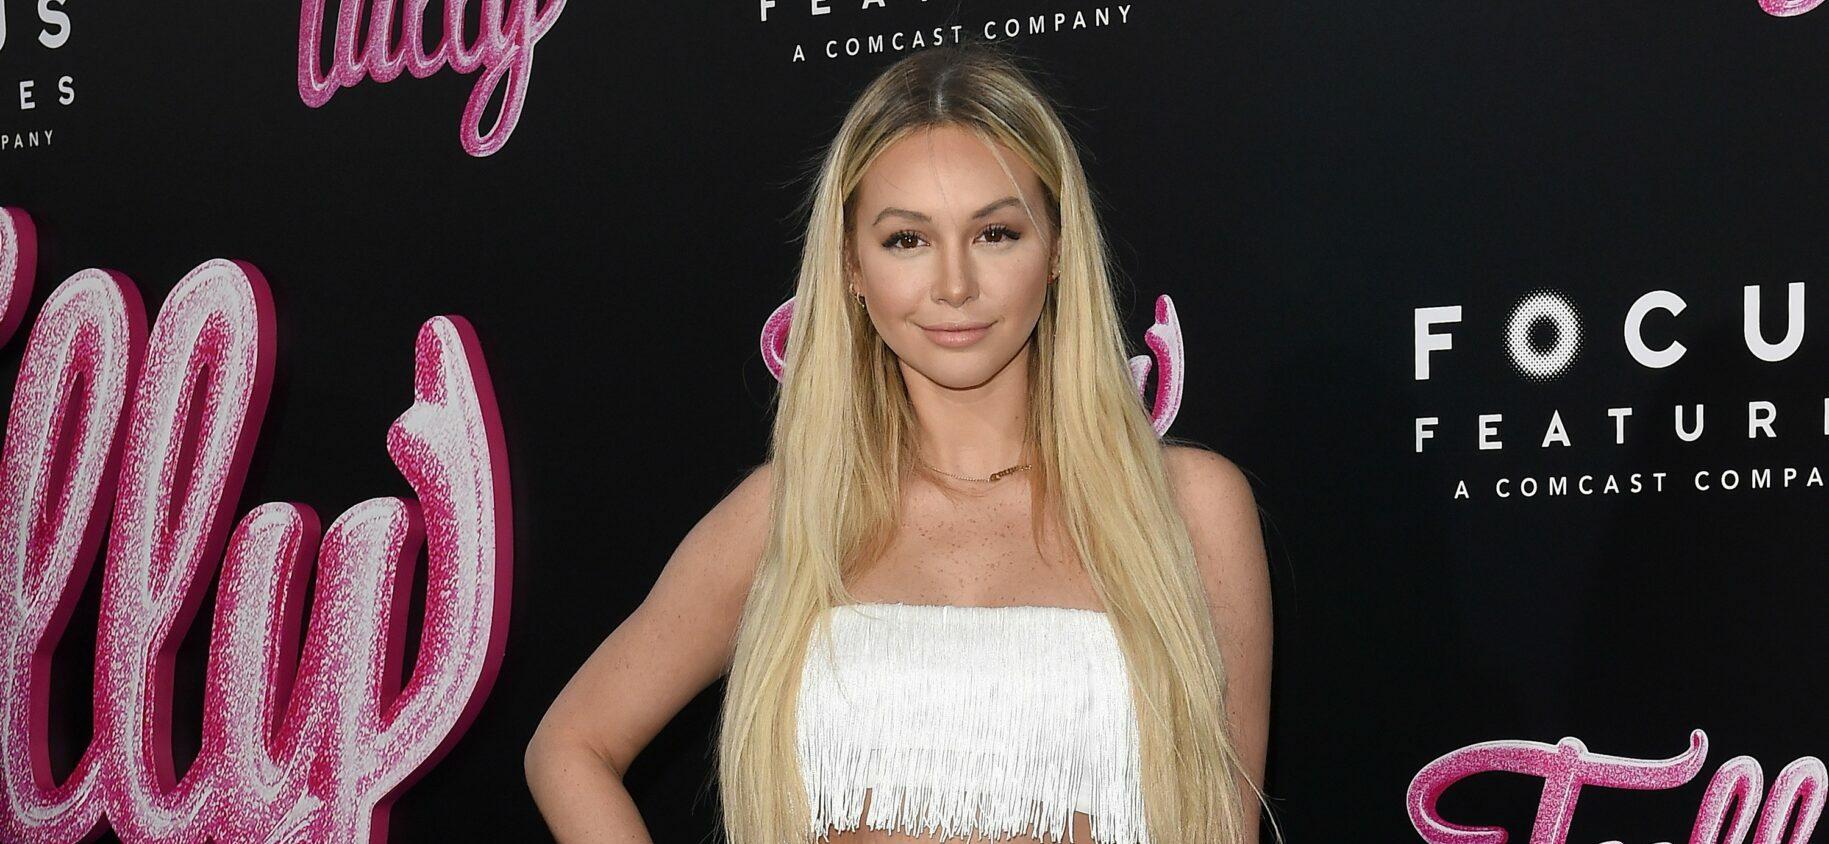 Corinne Olympios at "Tully" Premiere